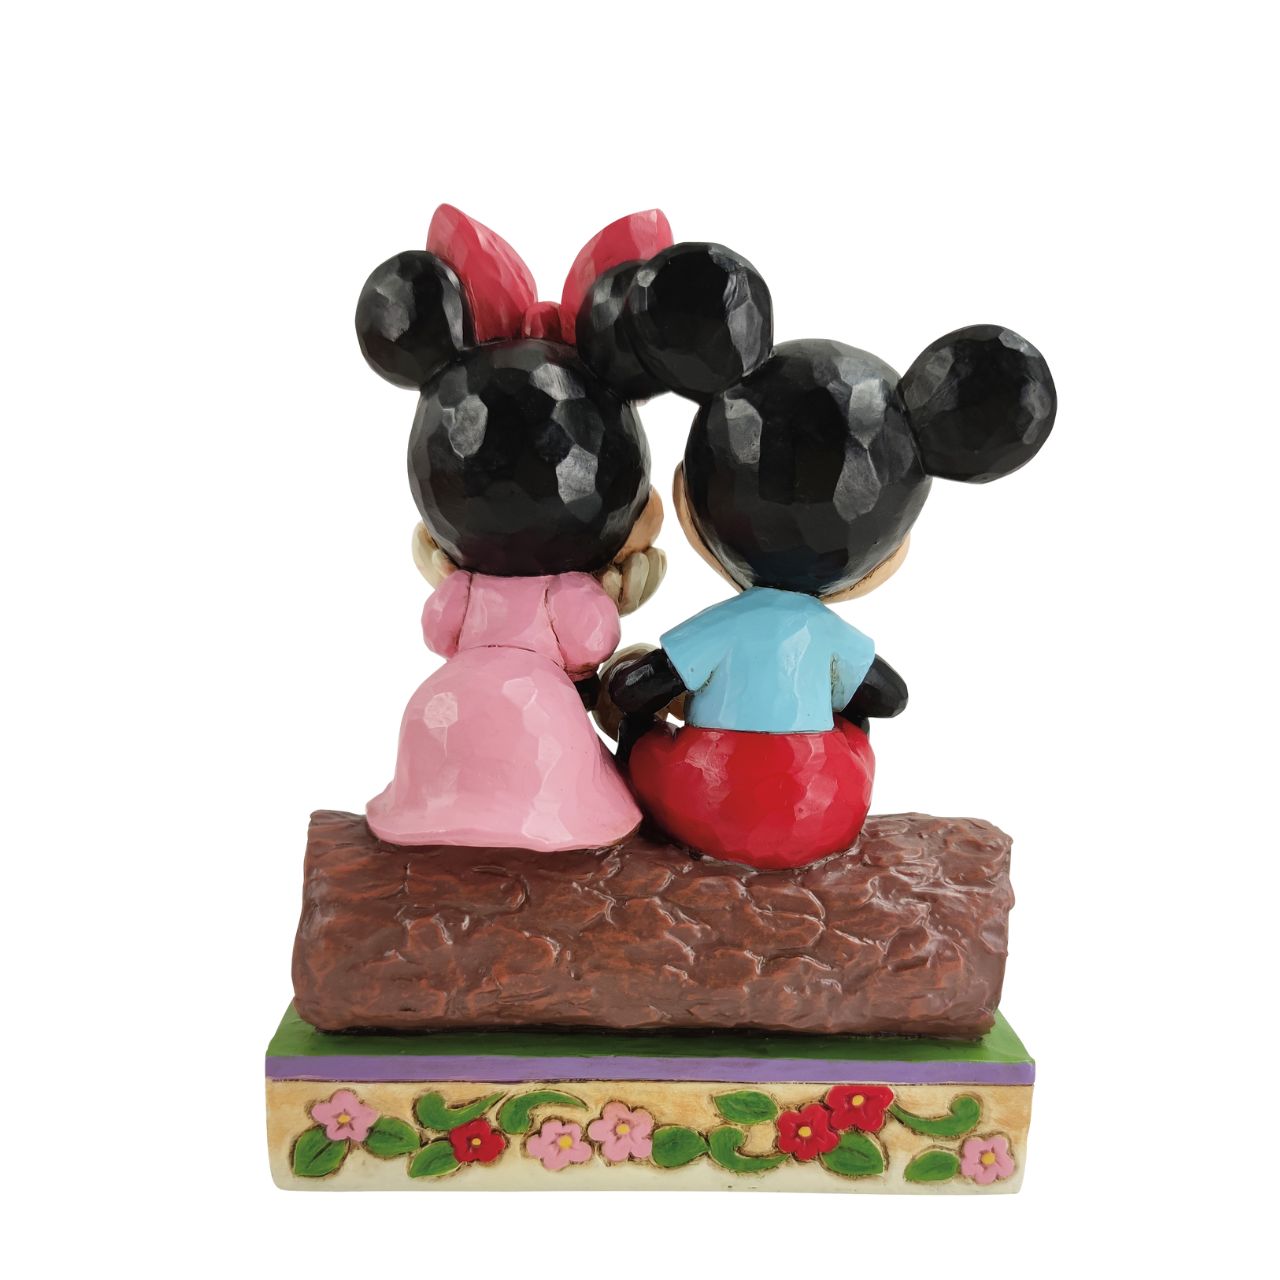 Disney Mickey & Minnie Campfire Figurine  Mickey & Minnie Campfire Figurine Made from cast stone. Packed in a branded gift box. Unique variations should be expected as this product is hand painted. Not a toy or children's product. Intended for adults.